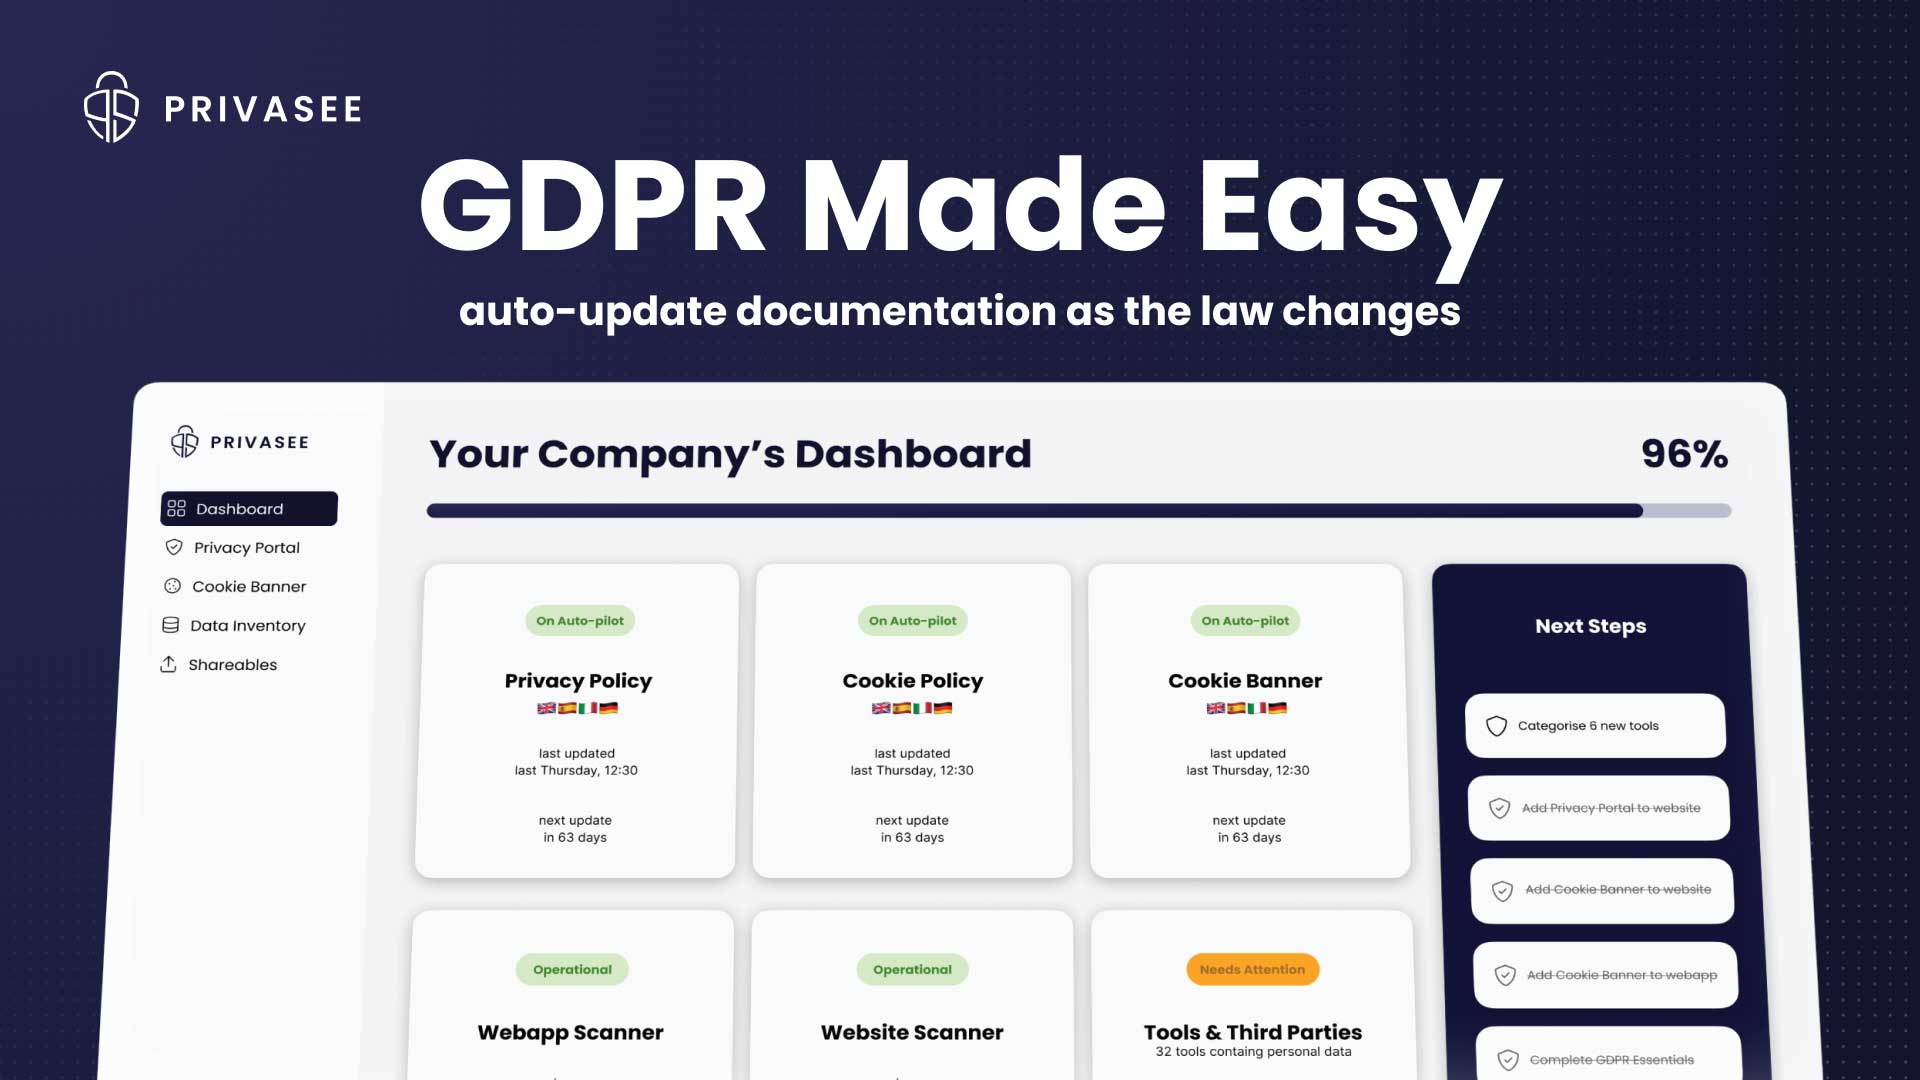 Privasee Offers Companies A Hands-Off Approach To The General Data Protection Regulation With Their GDPR Compliance Software